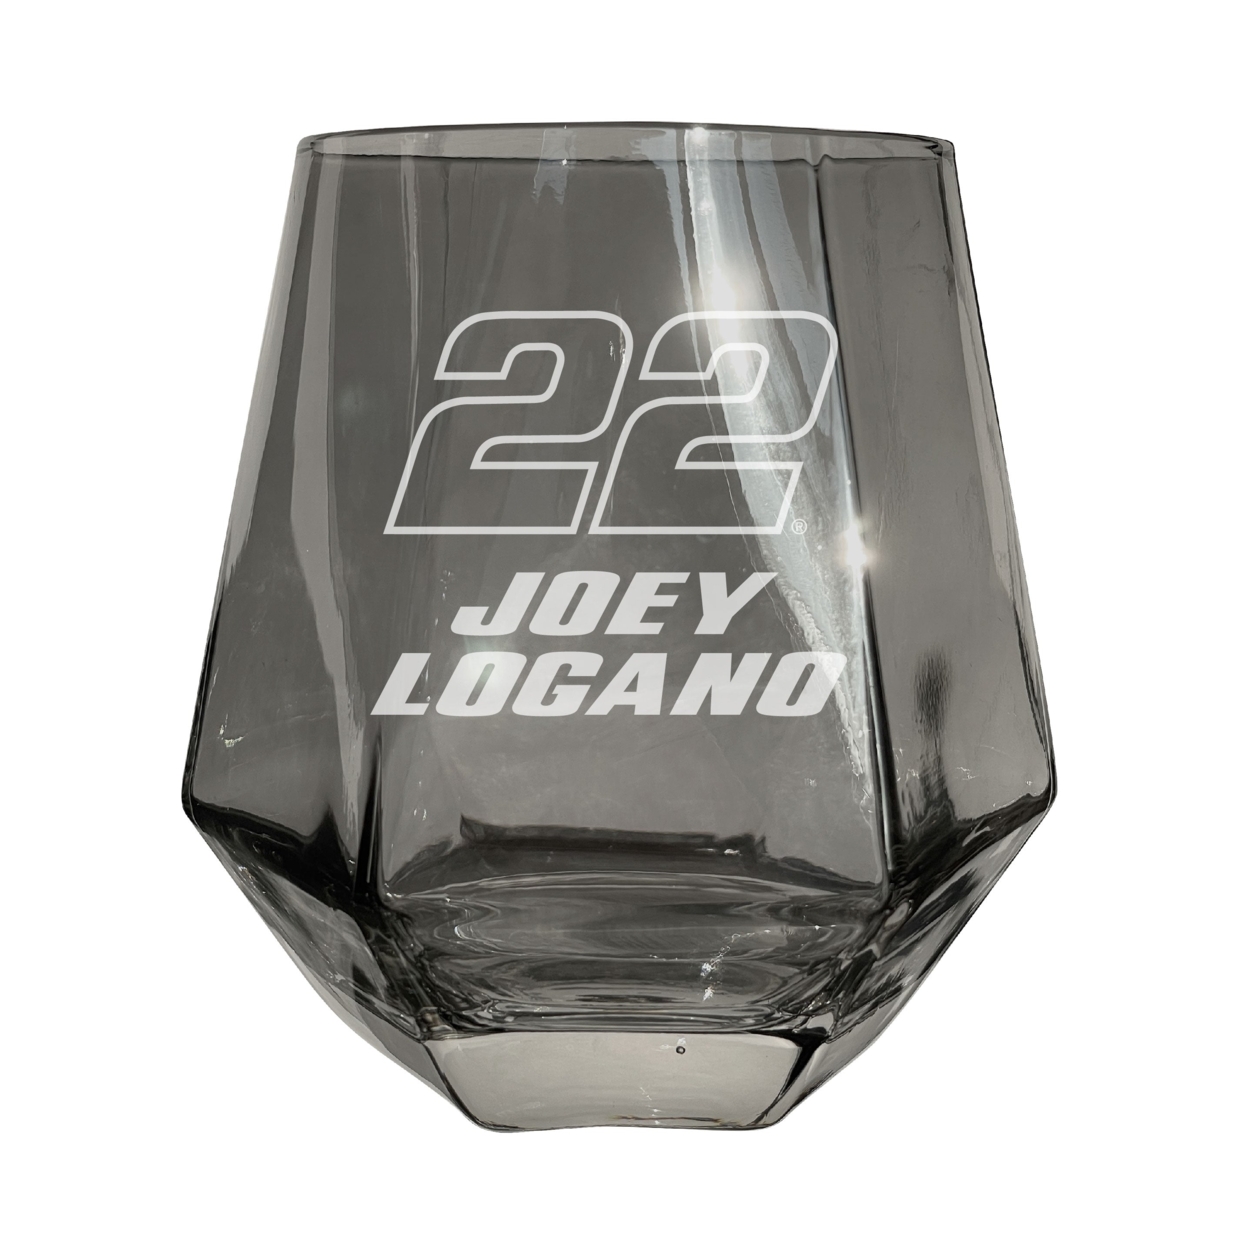 #22 Joey Logano Officially Licensed 10 Oz Engraved Diamond Wine Glass - Clear, 2-Pack